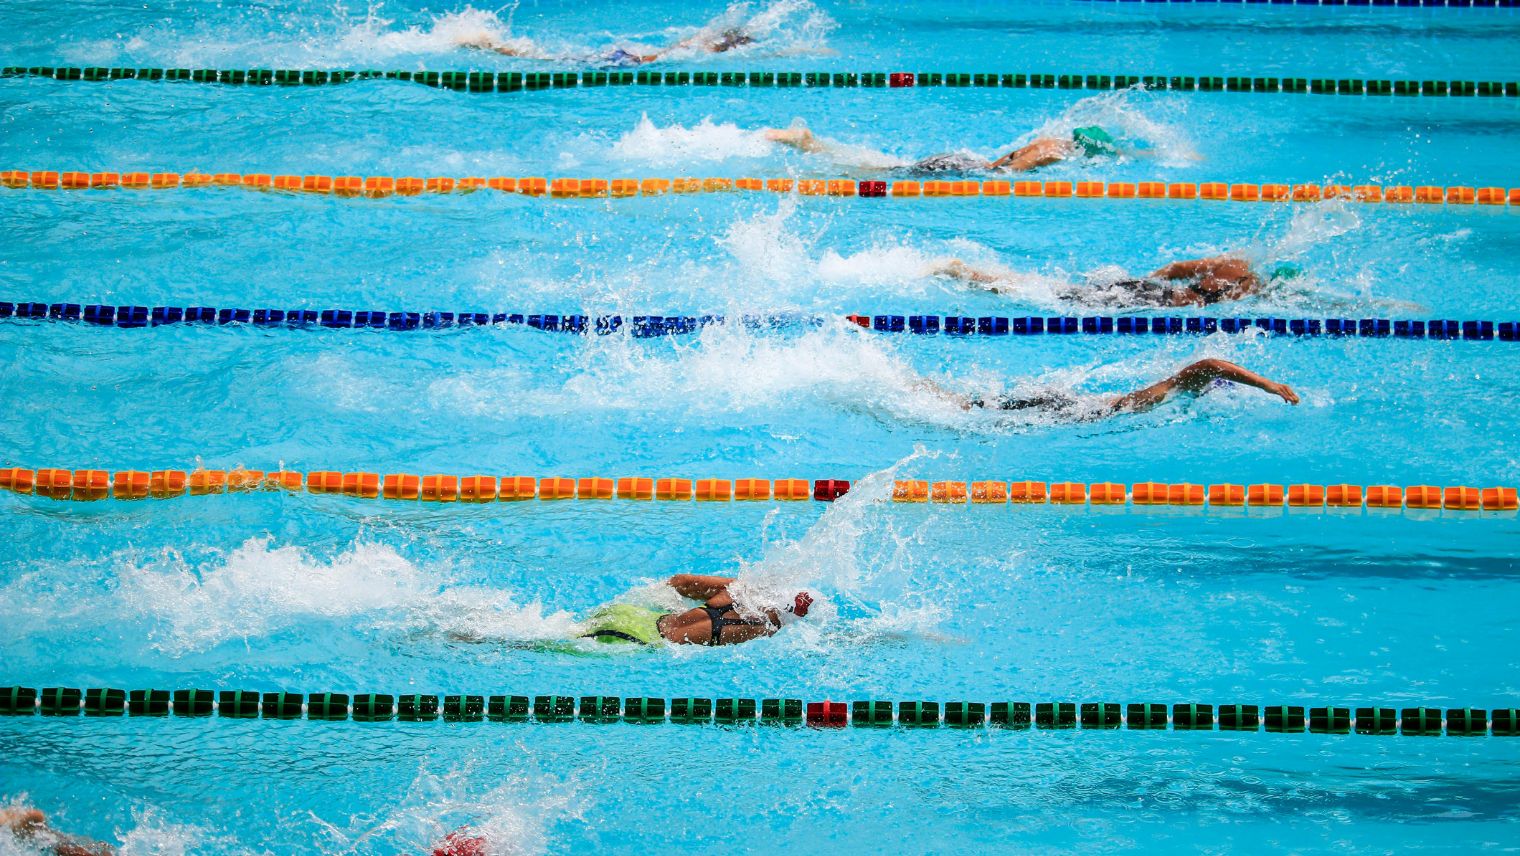 Swimmers at a competition